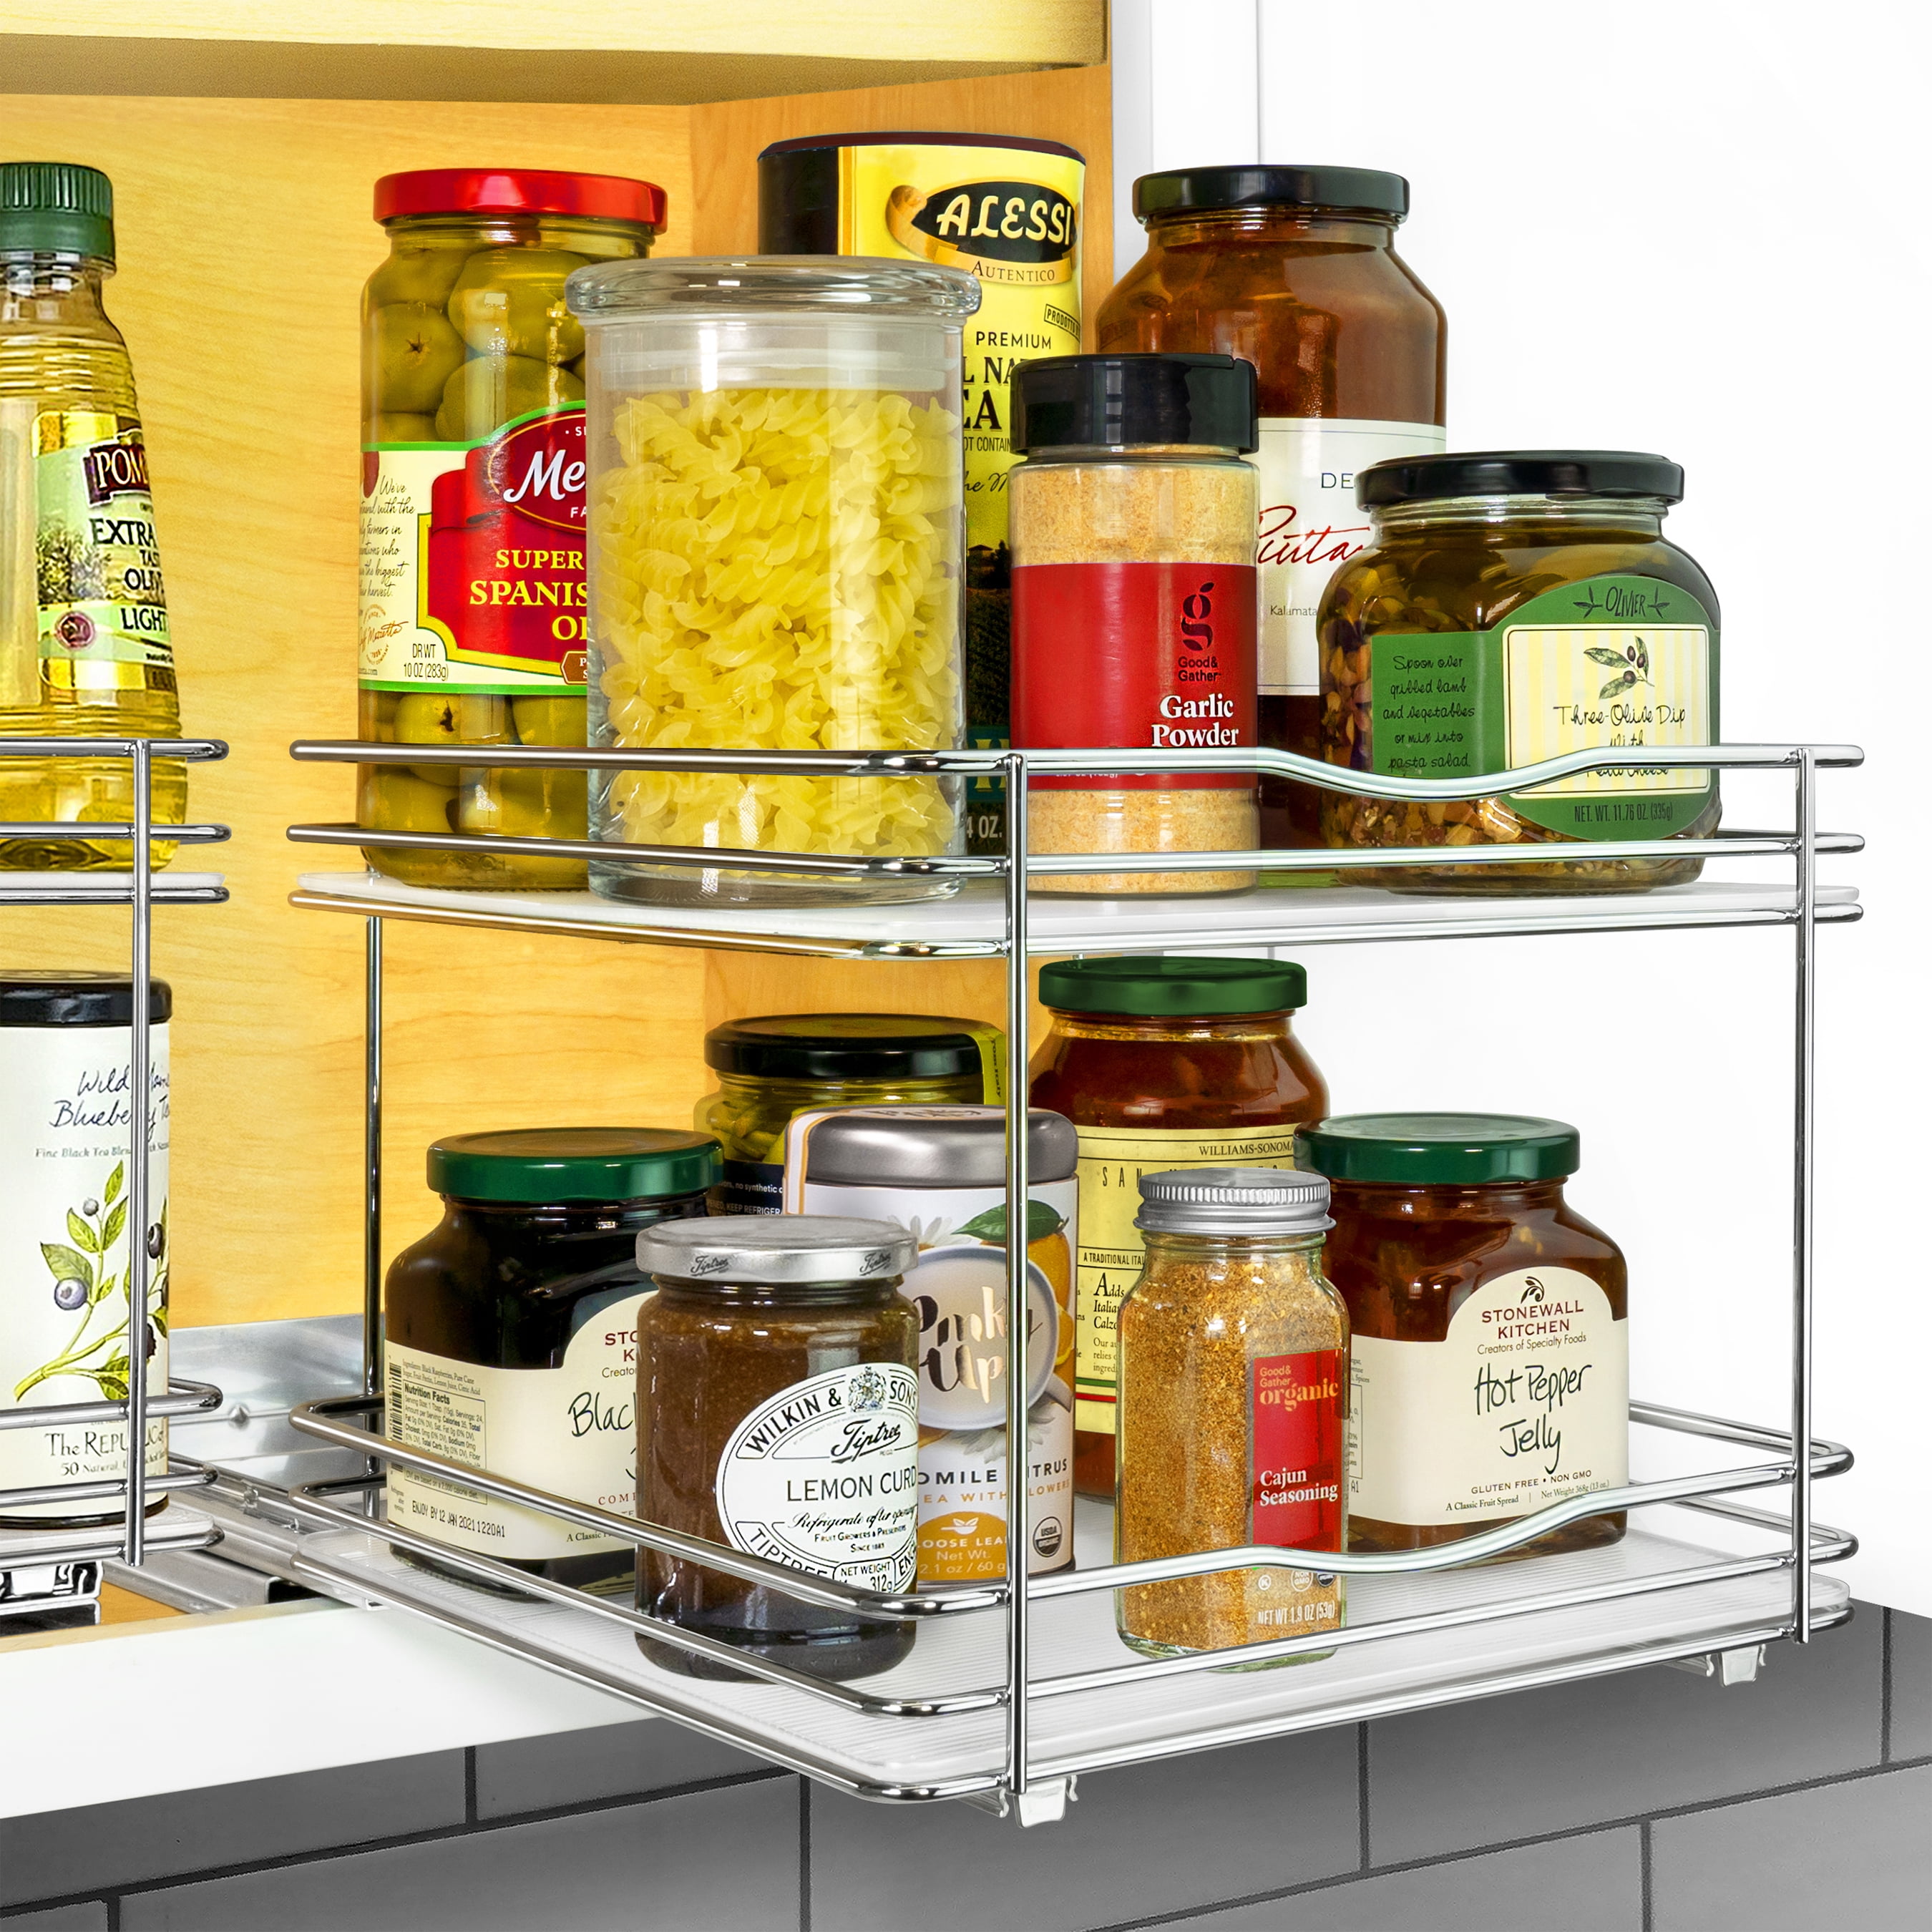 d'Avallon Pull Out Spice Rack Organizer for Cabinet - Slide Out Rack -  Sliding Spice Organizer Shelf - Seasoning Spice Organizer for Kitchen  Cabinet 